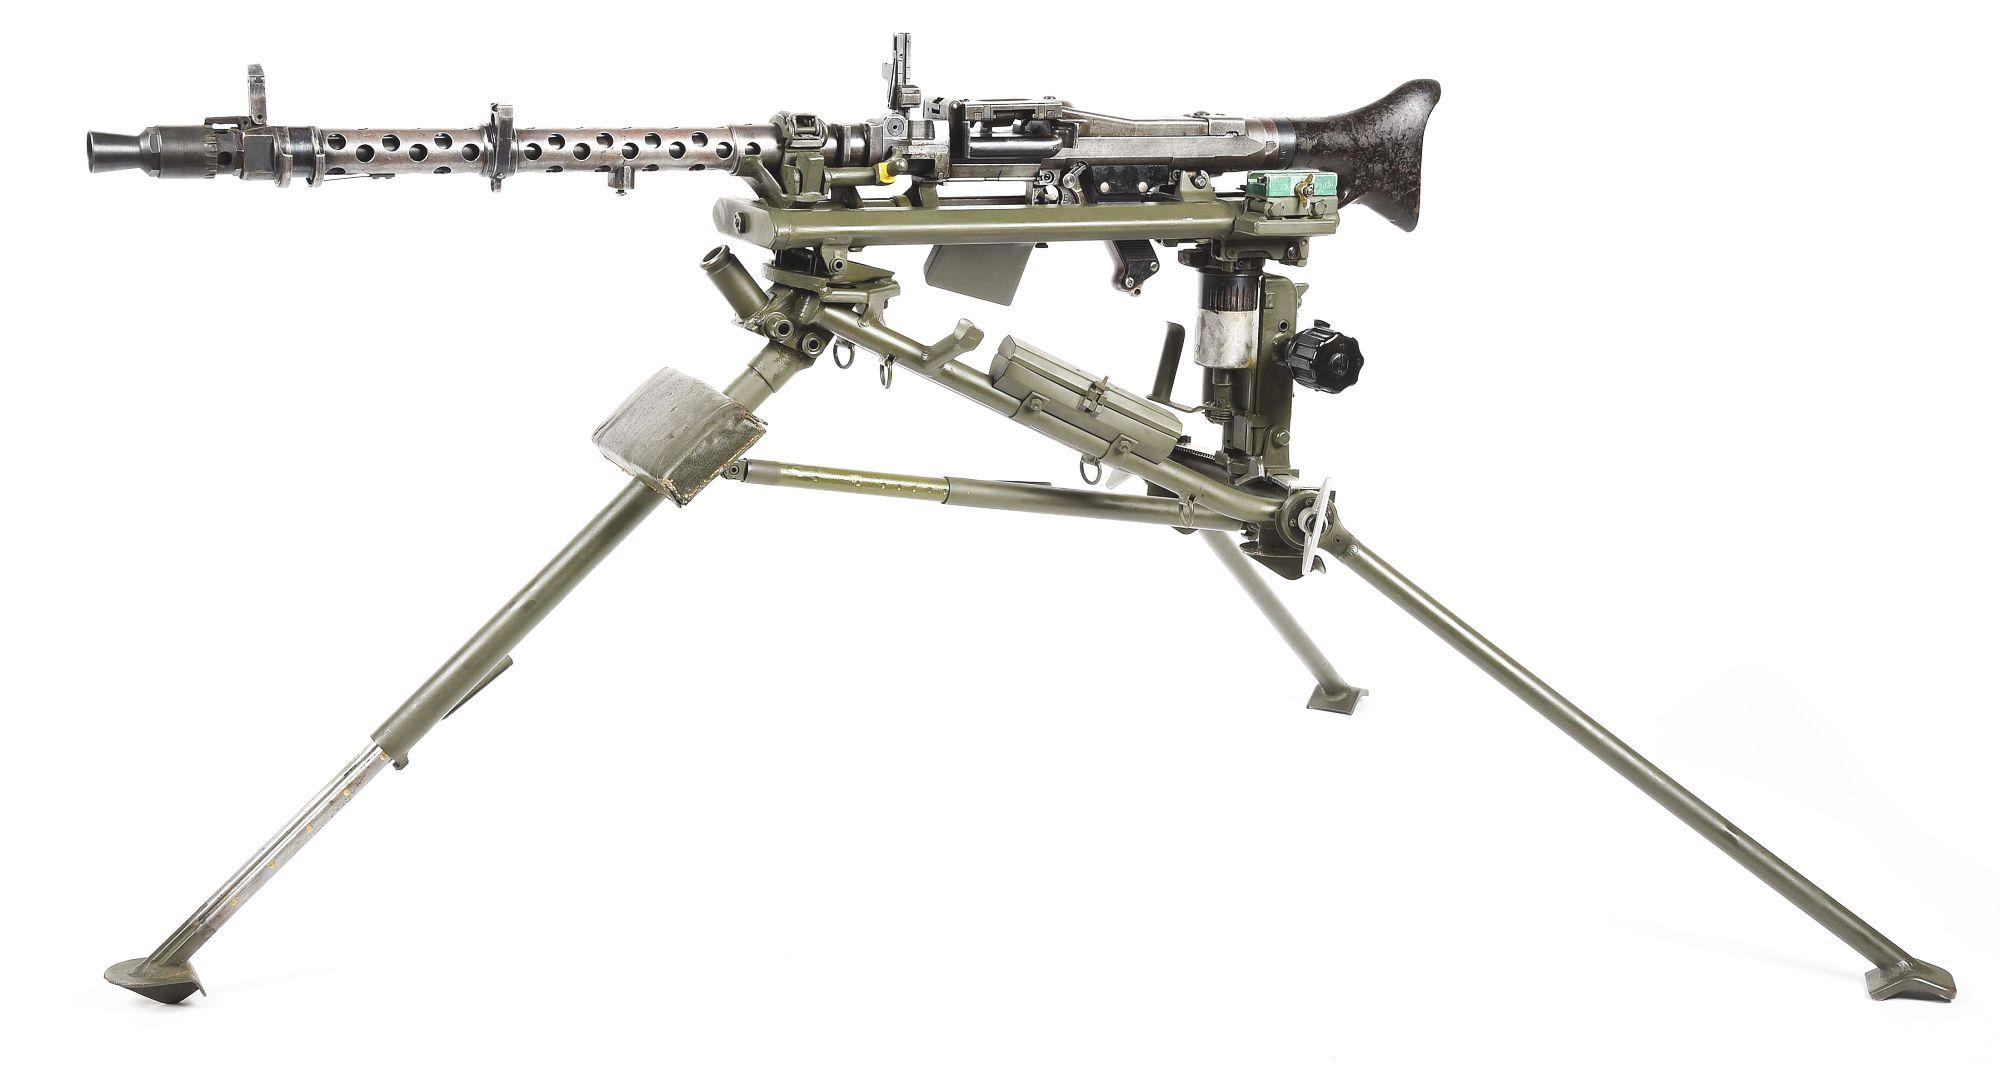 (N) SCARCE EARLY 1938 BERLIN SUHLER-WAFFEN MG-34 MACHINE GUN WITH LAFETTE TRIPOD AND ACCESSORIES (PR